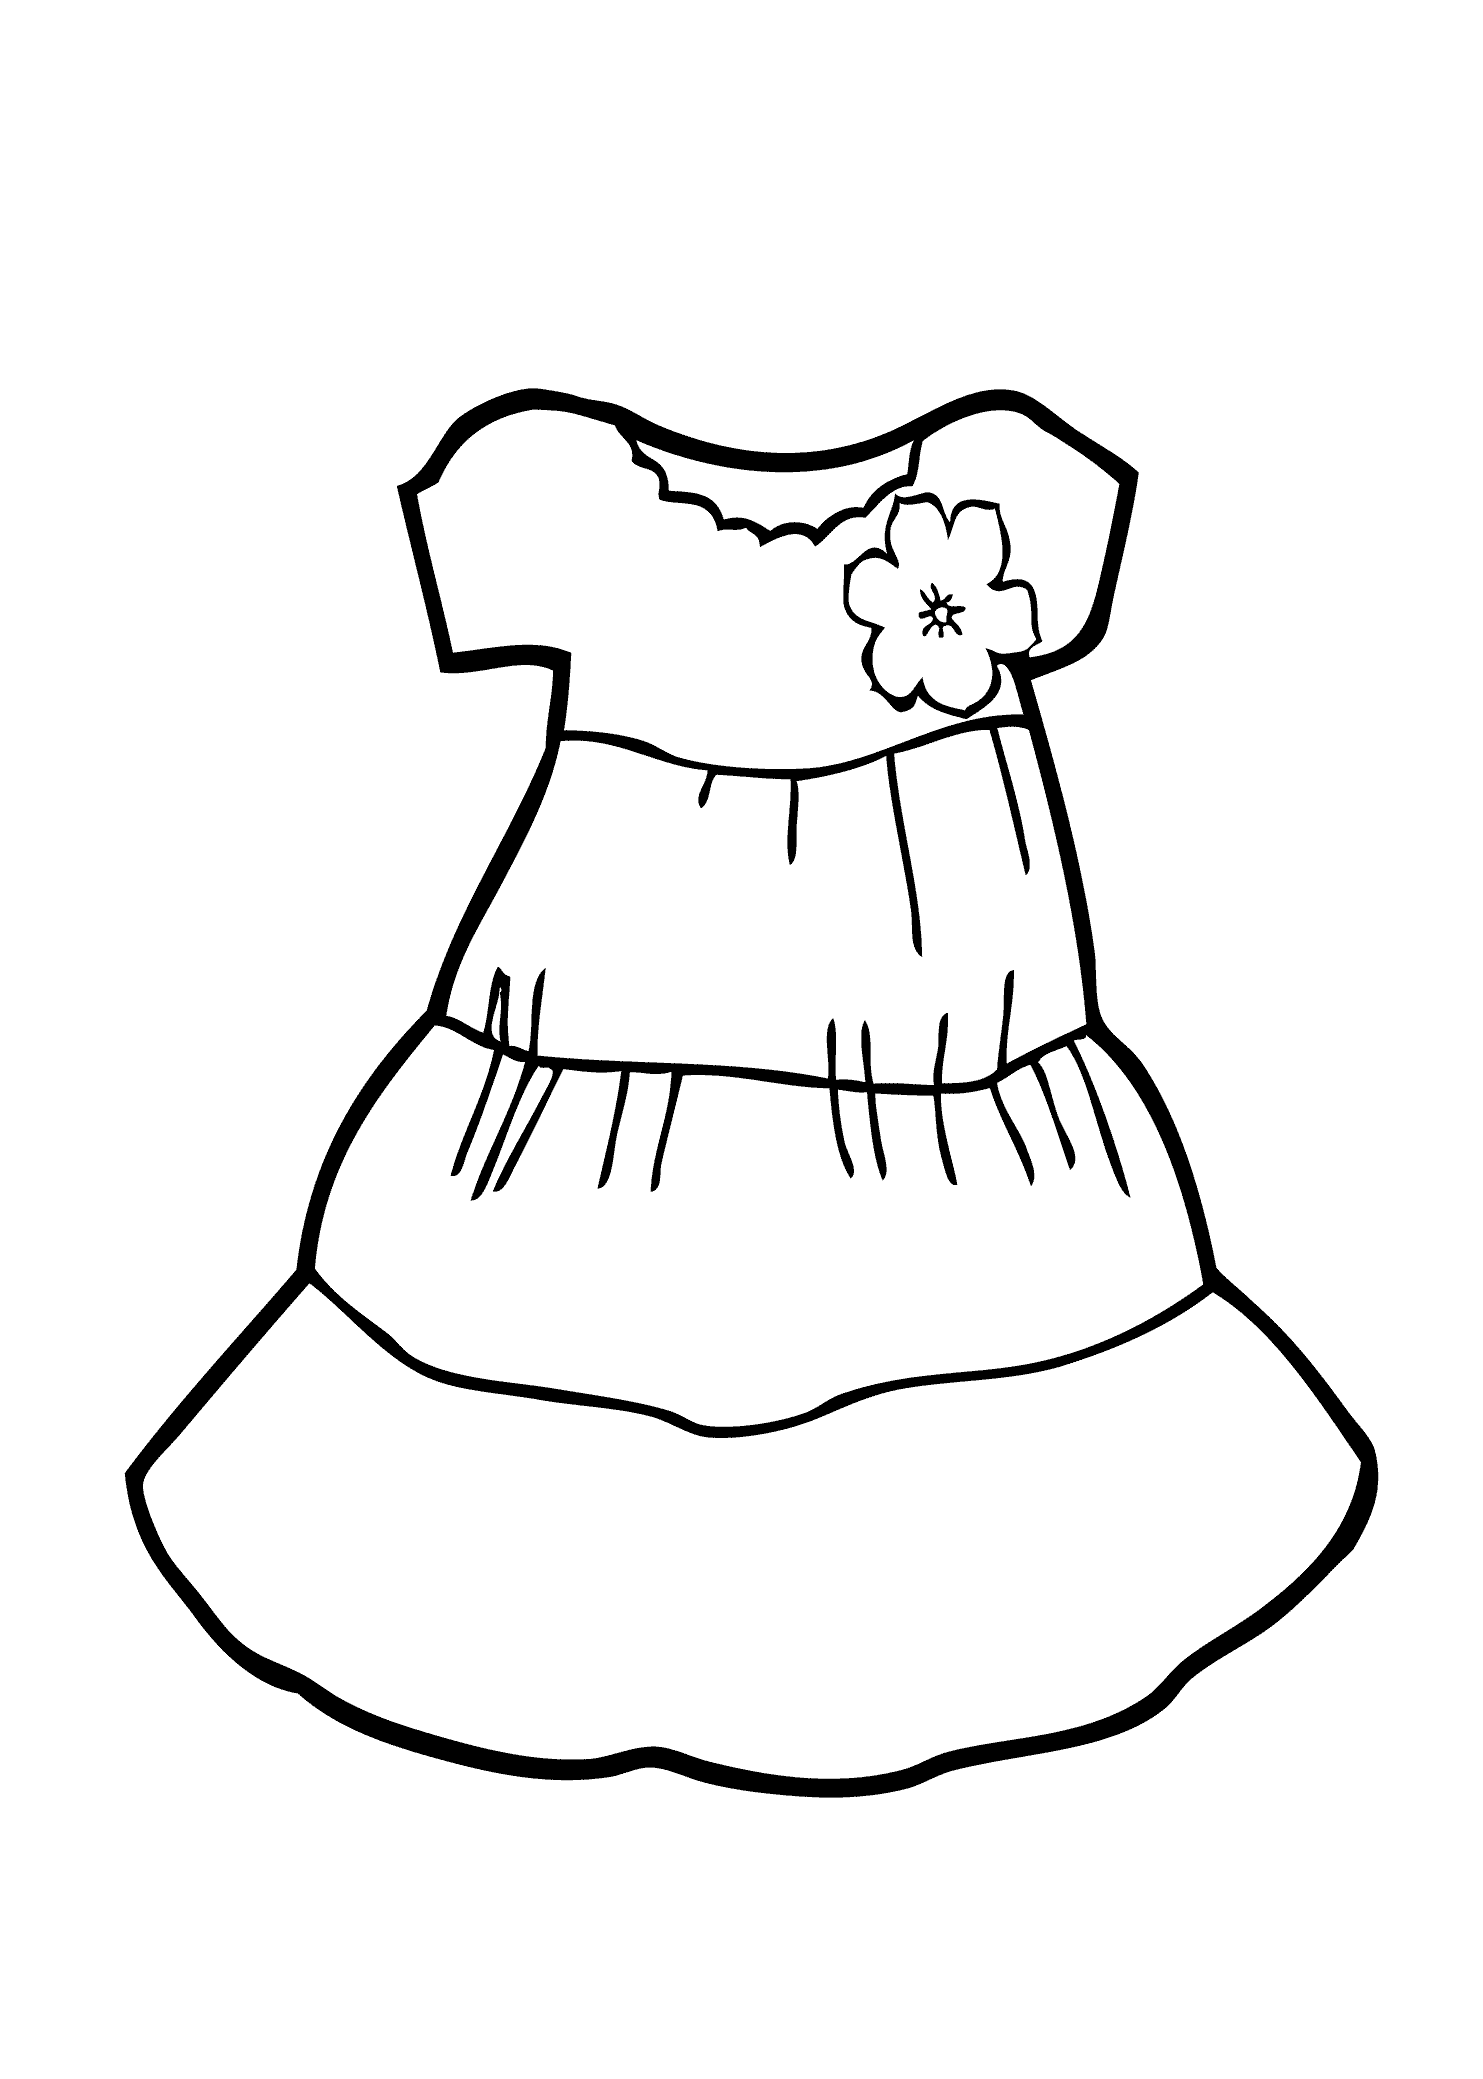 dress coloring pages to print dress coloring pages to download and print for free pages print to coloring dress 